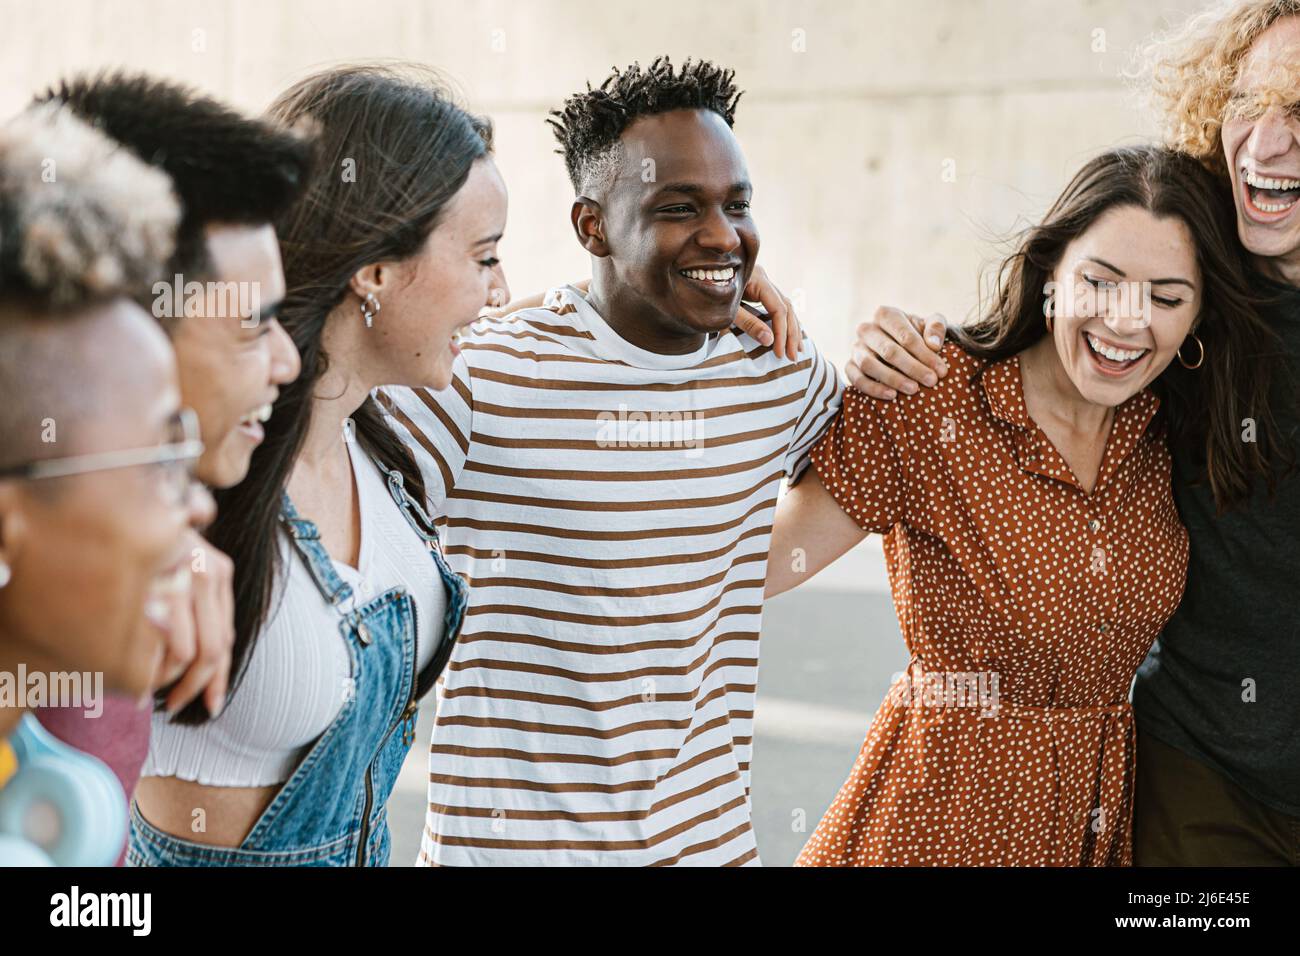 Group of happy multiracial young best friends laughing and having fun together Stock Photo